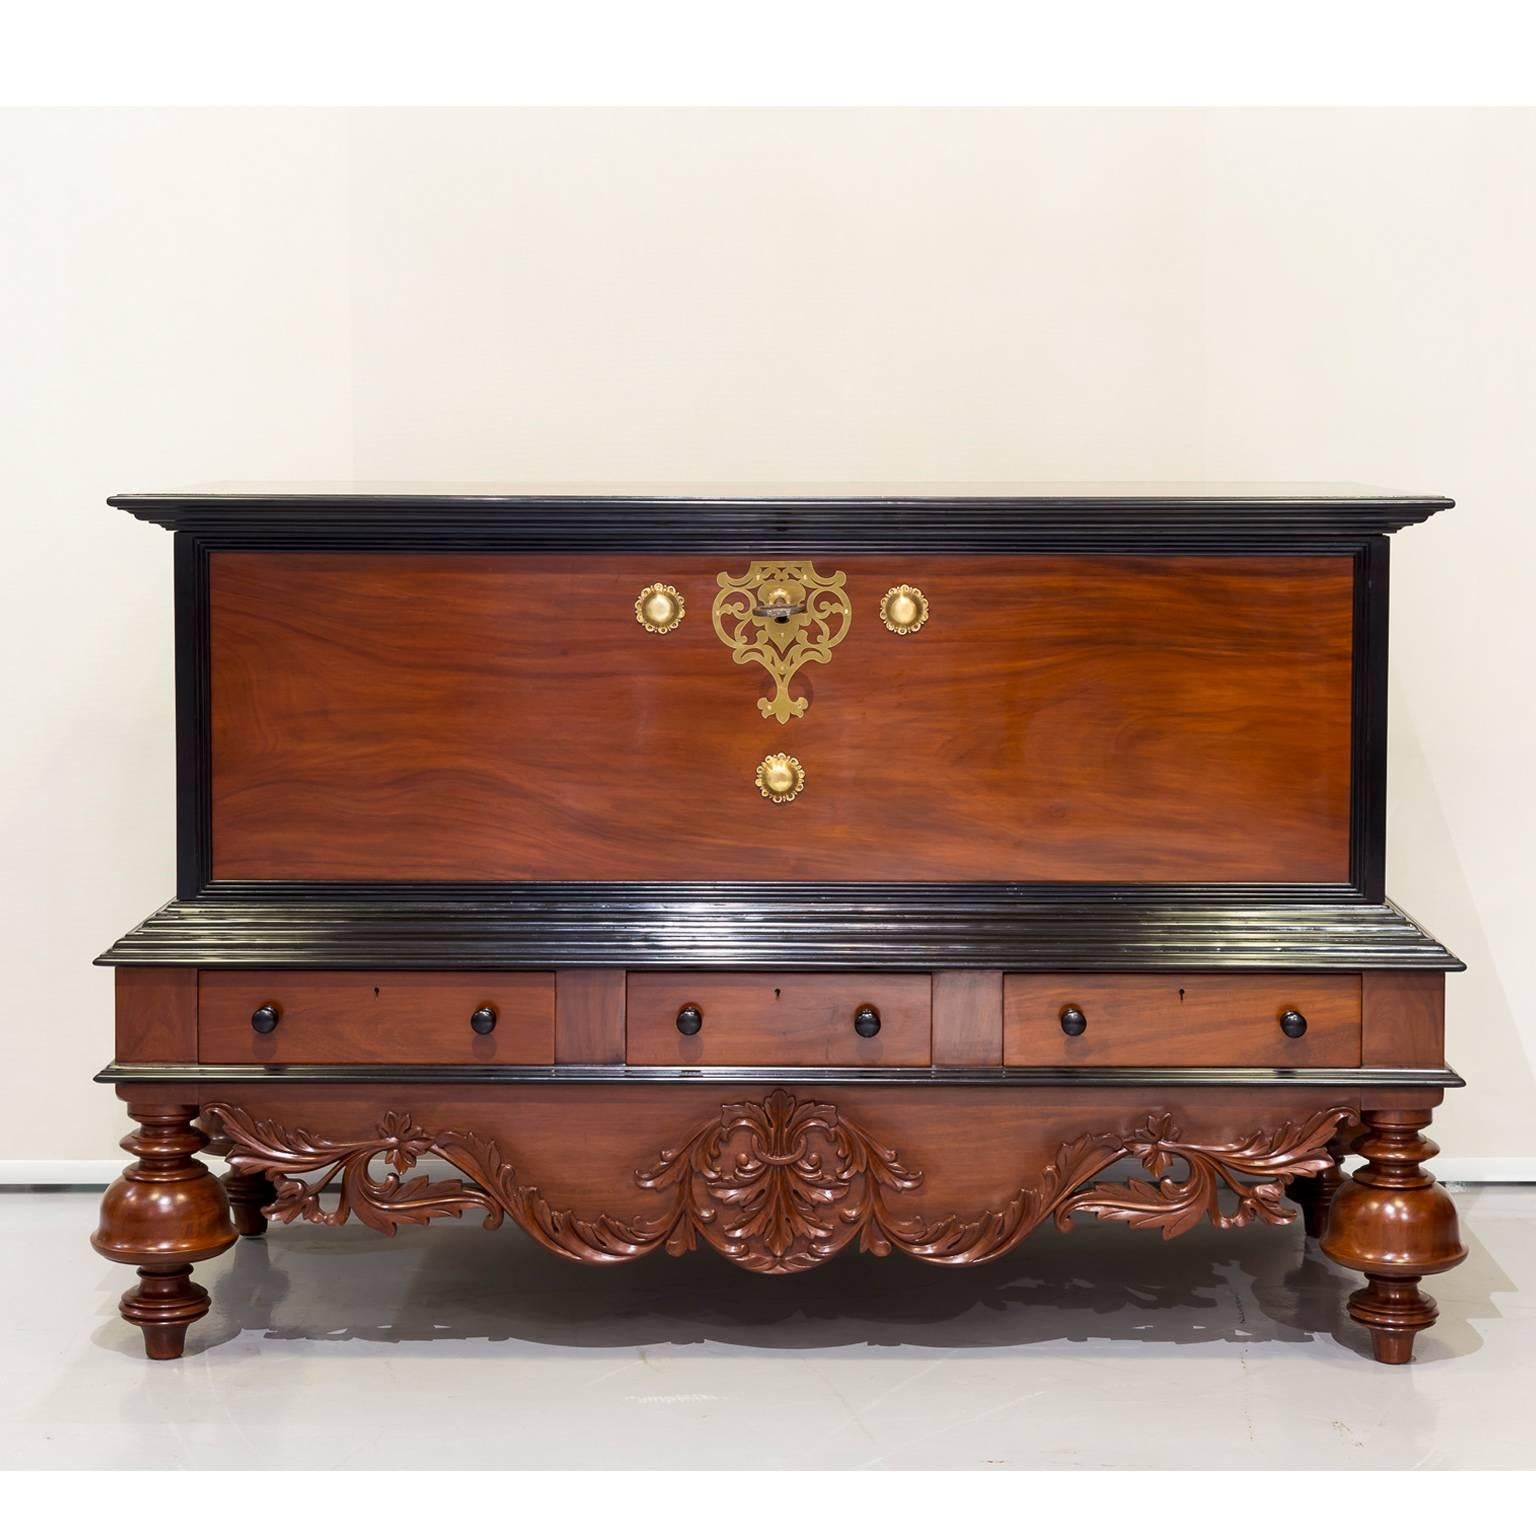 A stunning, large Dutch colonial storage chest of solid plank construction in mahogany; the lid and panels surrounded by an ebony edge. 
The front features an beautiful pierced brass escutcheon with original lock and large key. Two large brass